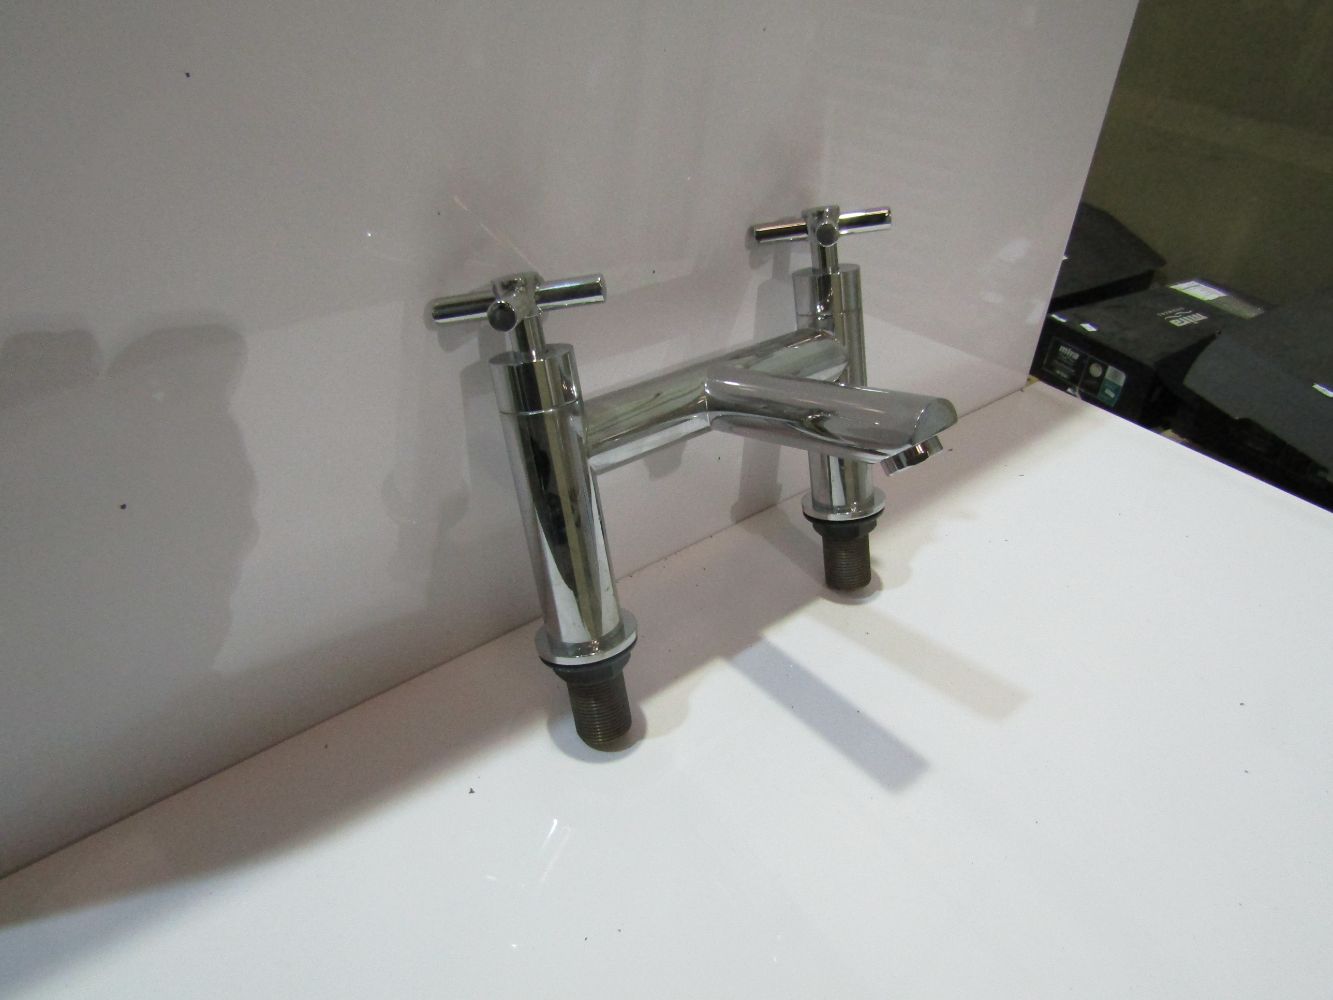 Bathroom stock and taps from Roca, Mira and more